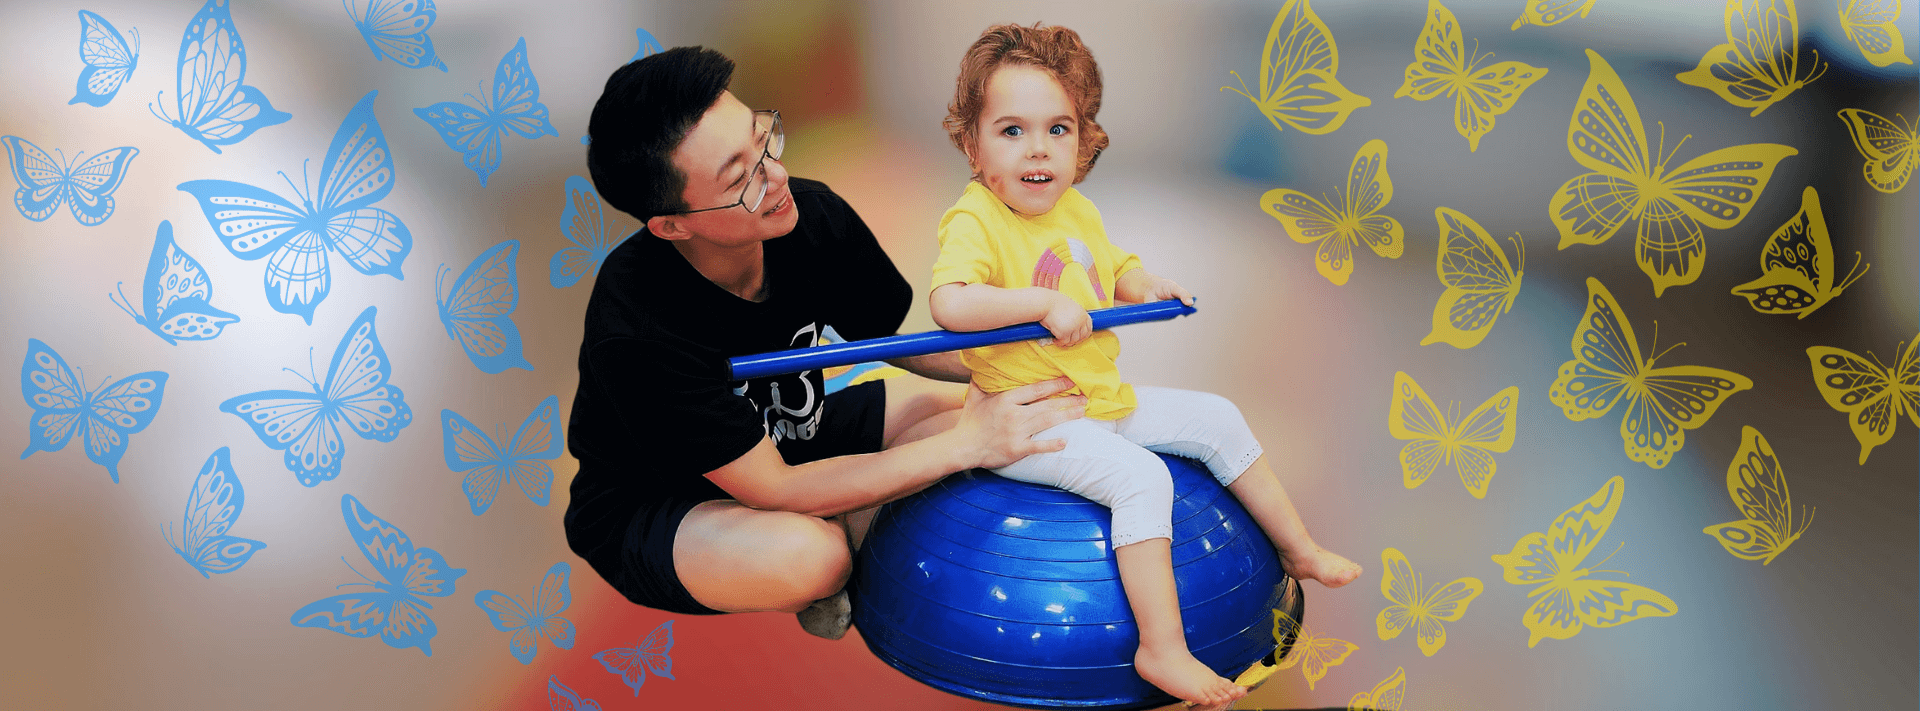 Physiotherapy services for kids in Singapore